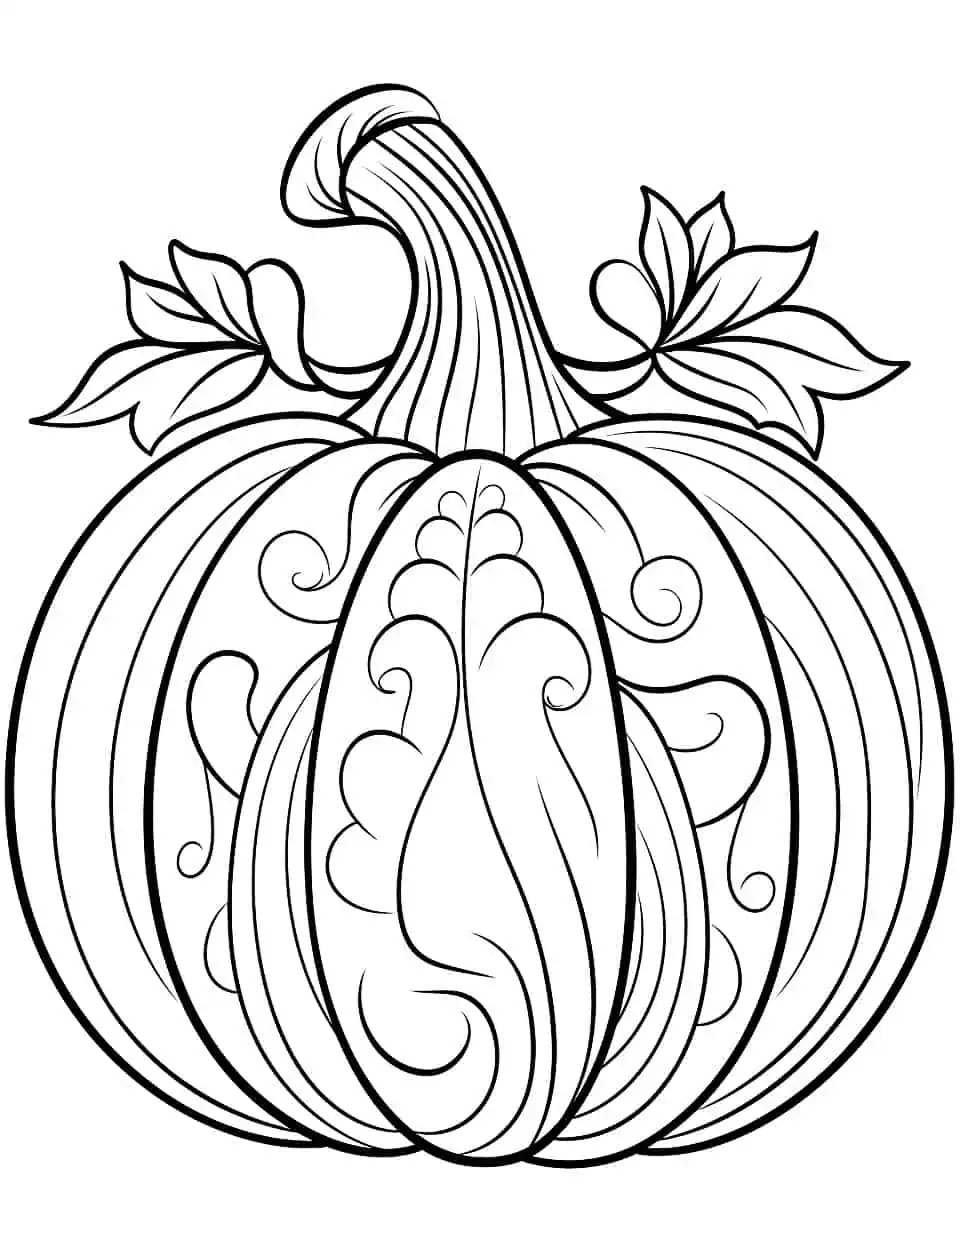 Detailed Pumpkin Coloring Page - A pumpkin with intricate designs and patterns for older children who enjoy a coloring challenge.